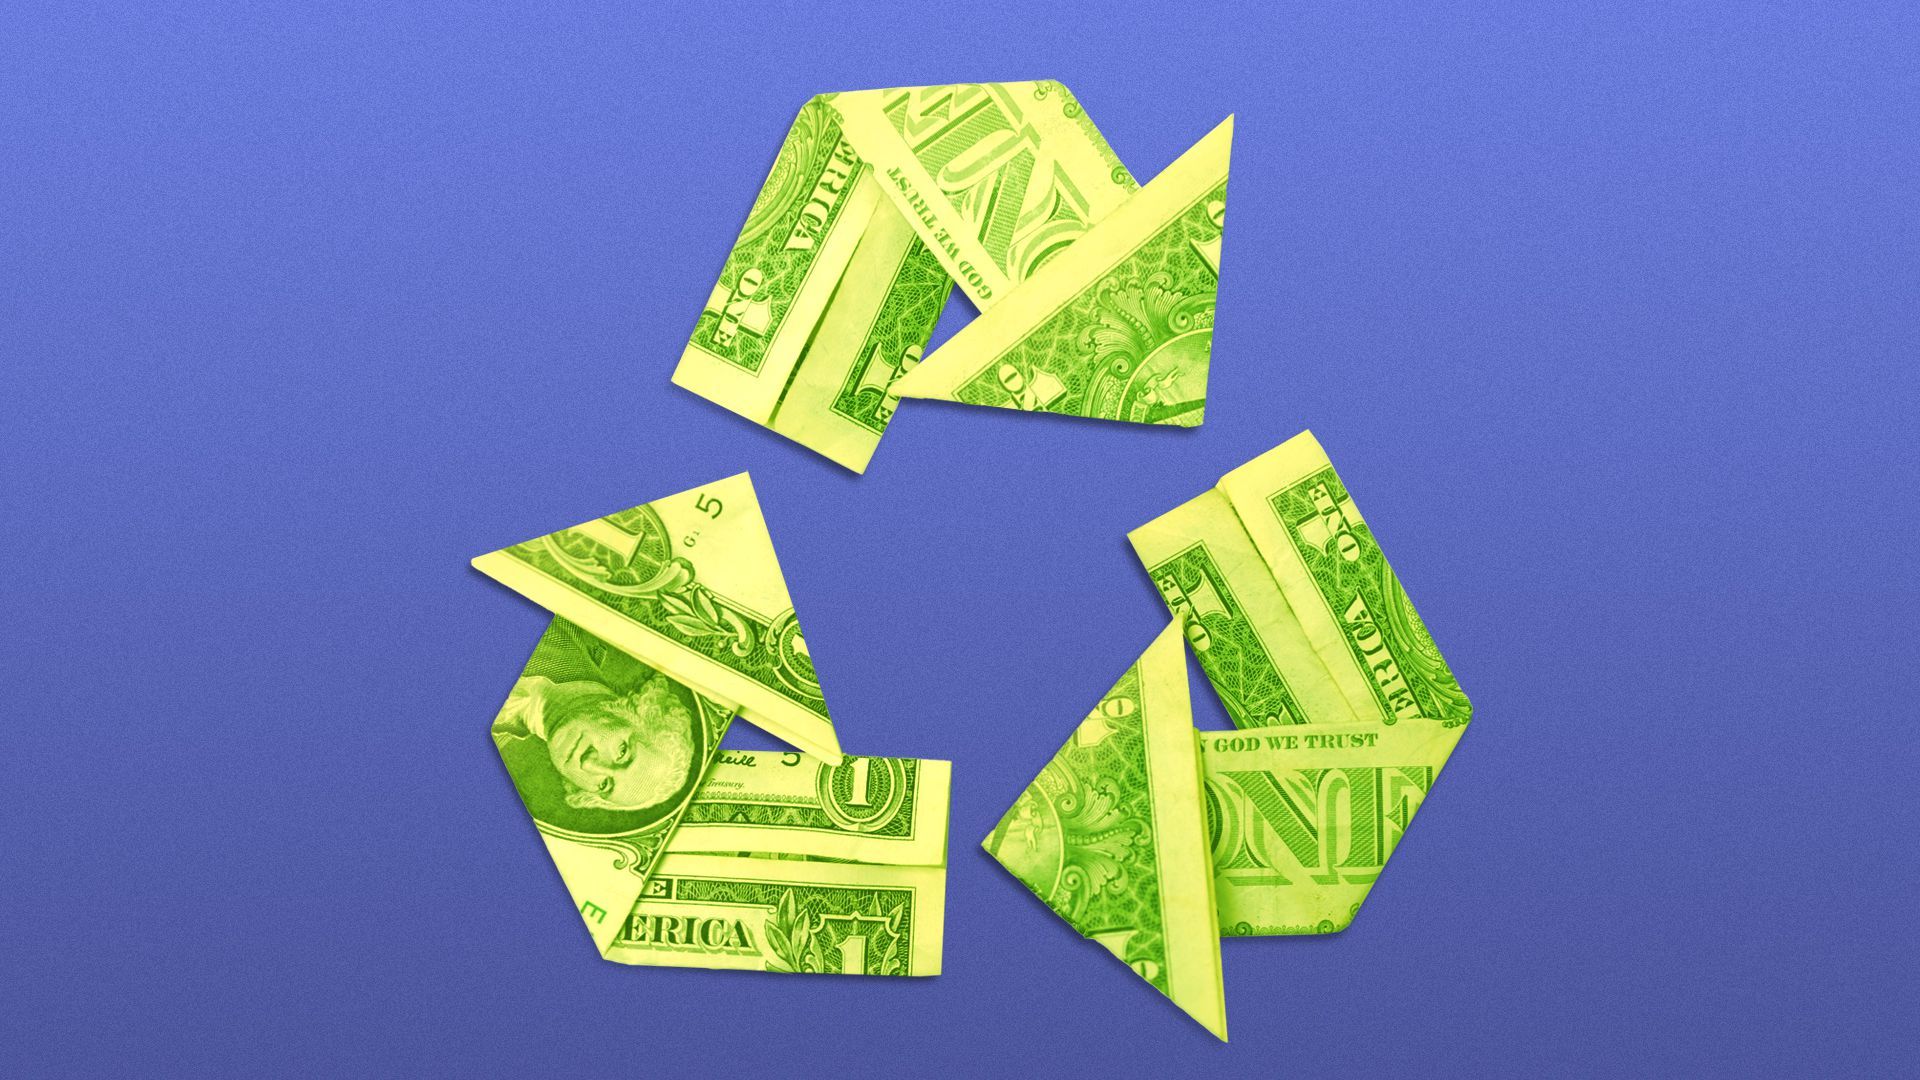 Illustration of the recycle symbol made out of dollar bills